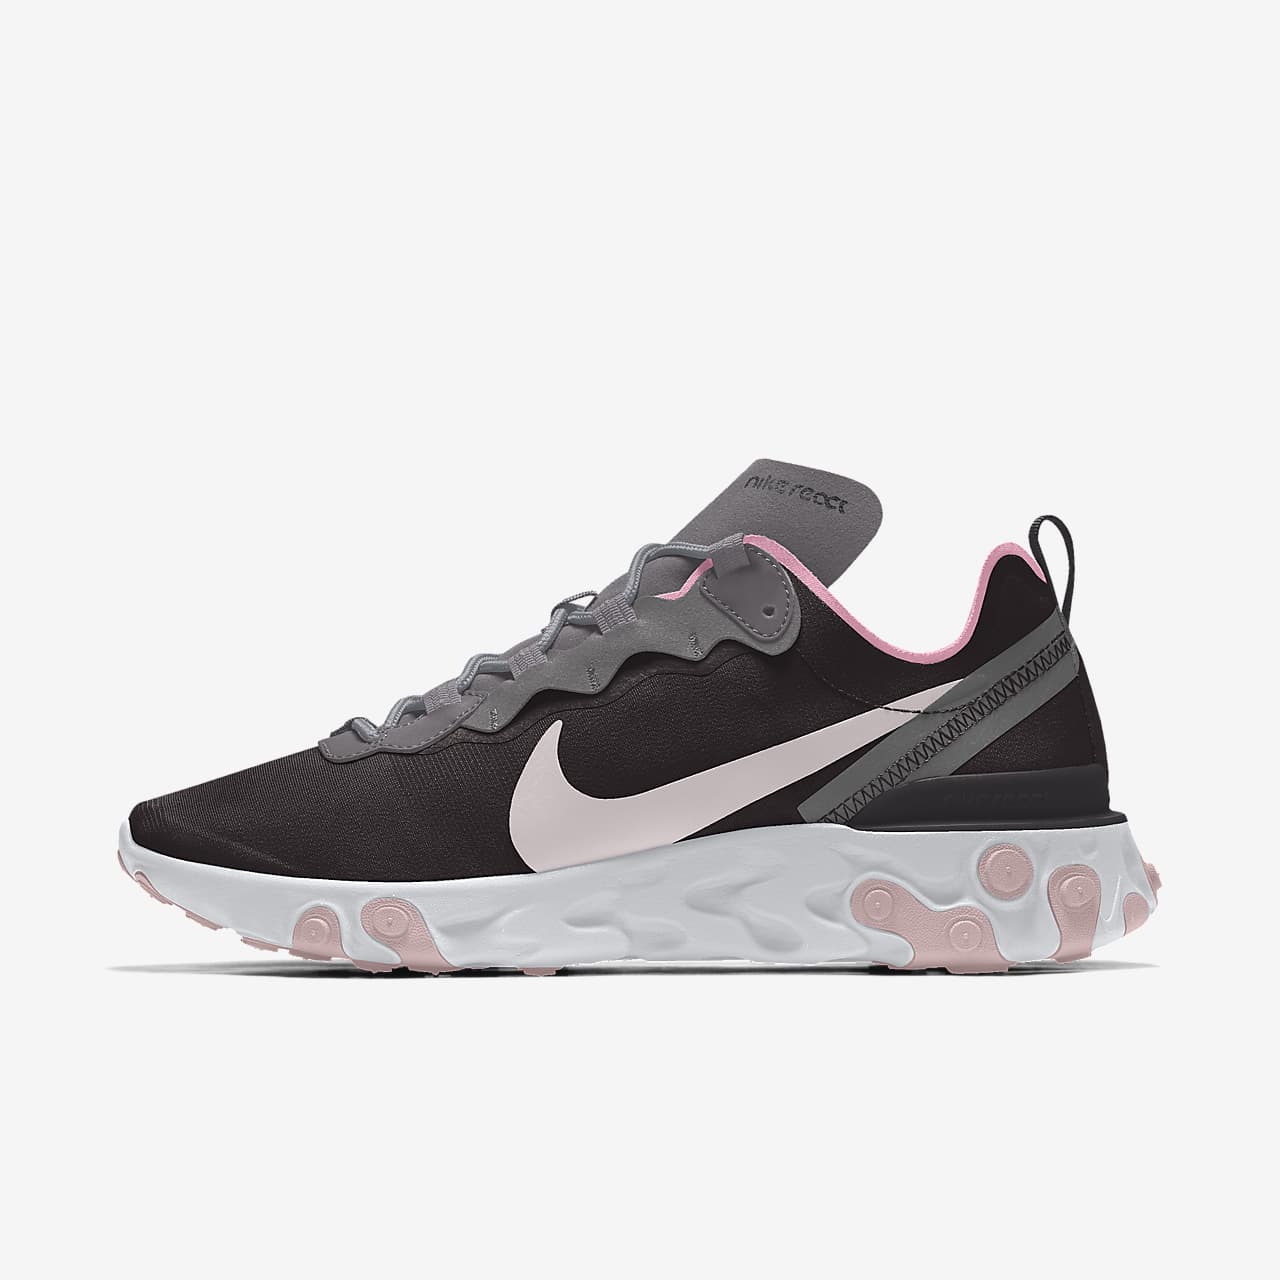 Chaussure lifestyle personnalisable Nike React Element 55 By You pour Femme